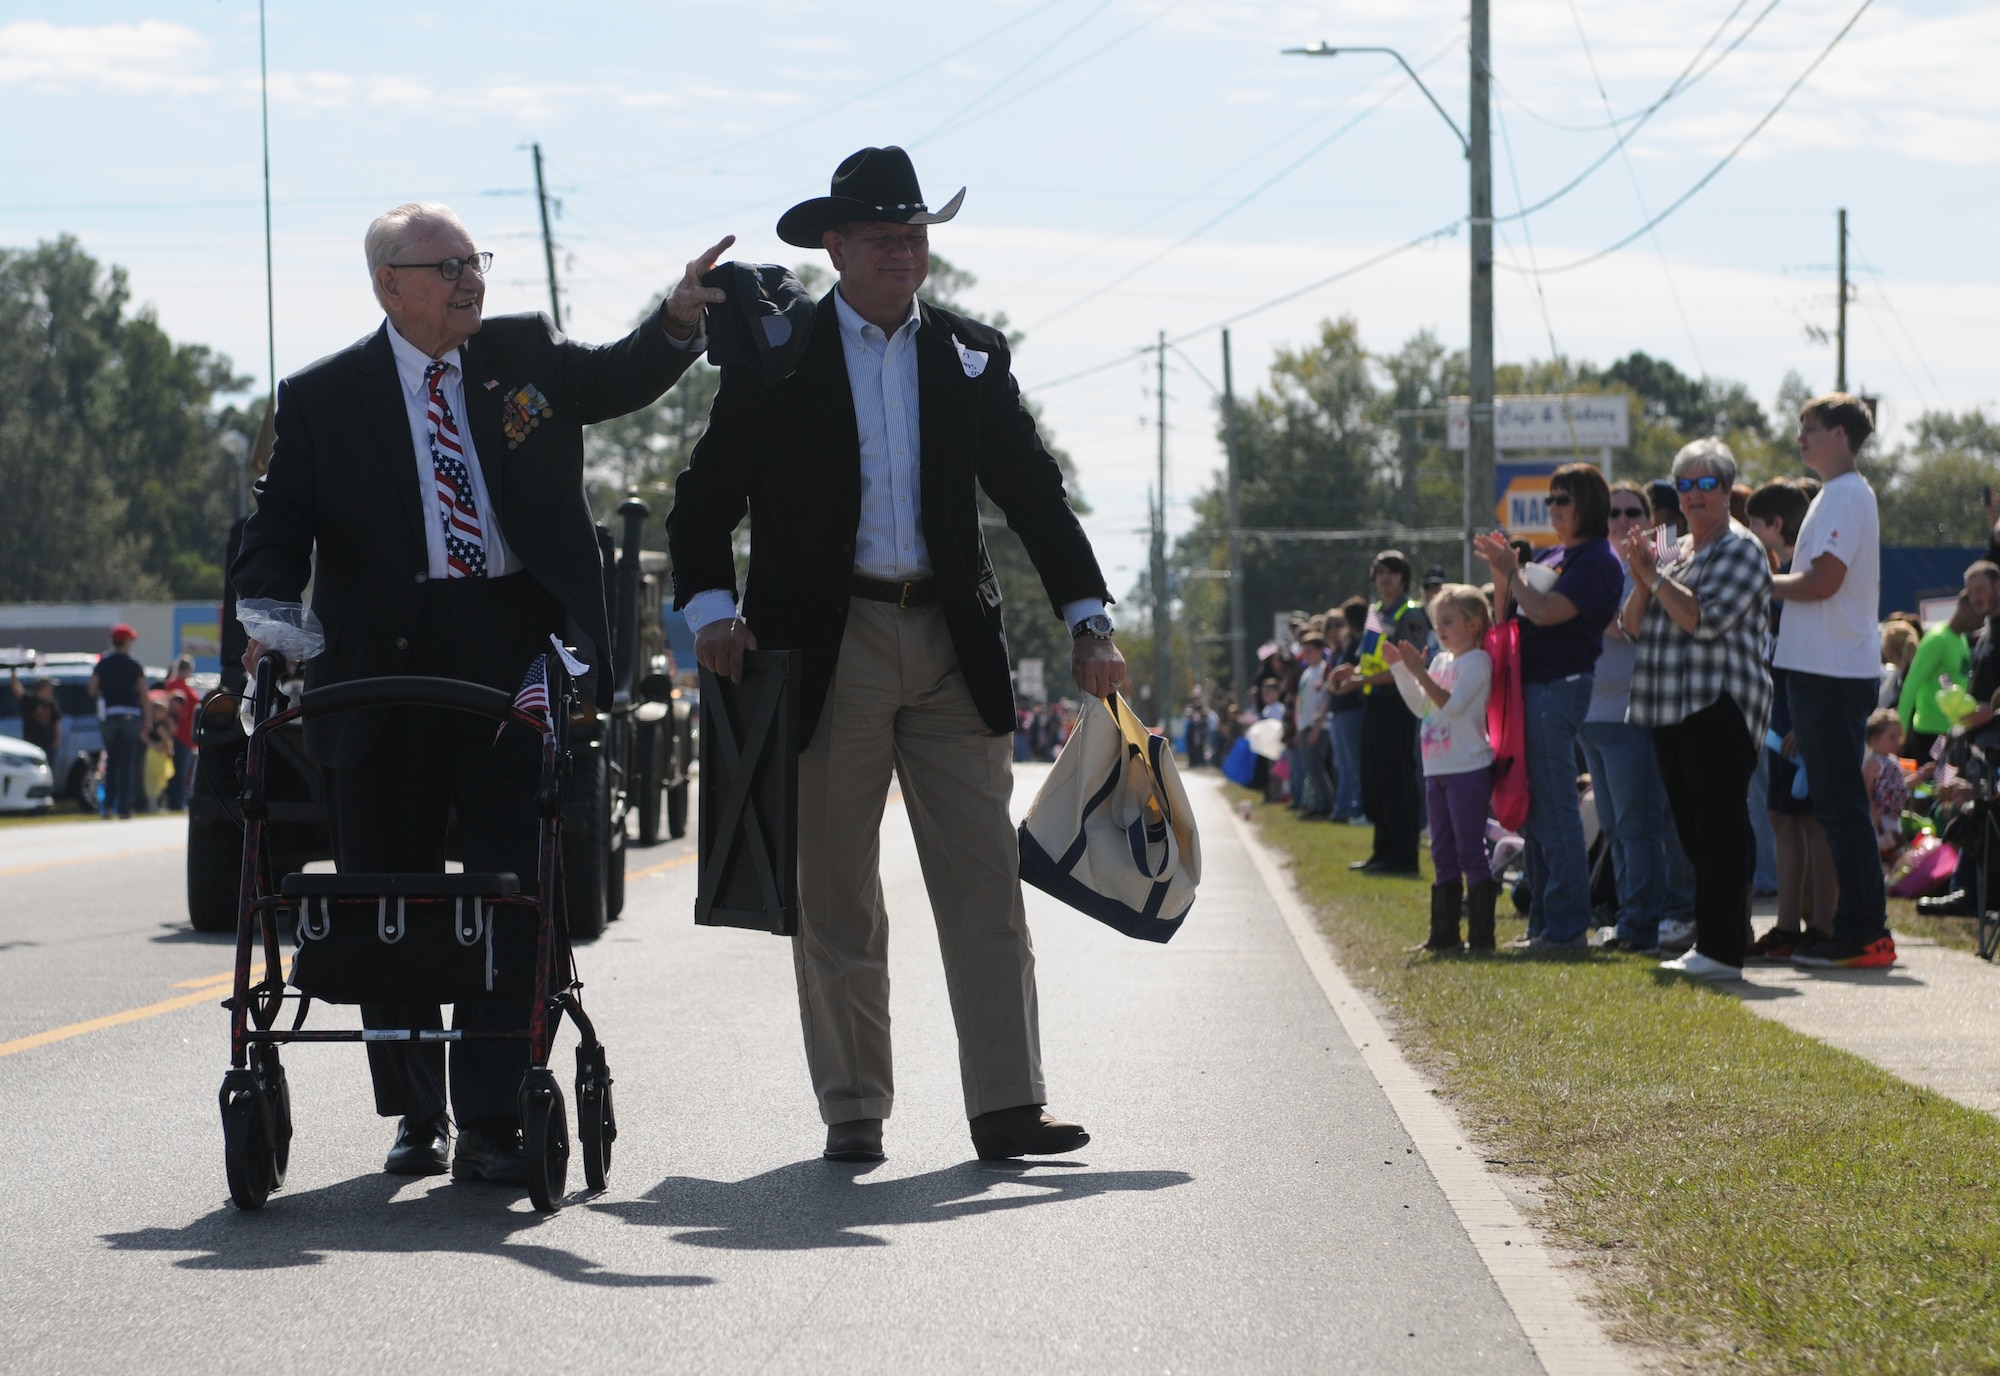 Retired Air Force Lt. Col. Henry Burkle, WW II veteran, arrives as grand marshal at the 16th Annual Gulf Coast Veterans Day Parade Nov. 12, 2016, in D’Iberville, Miss. More than 5,000 Mississippi and Louisiana citizens watched the parade honoring Gulf Coast veterans. Keesler Honor Guard members, base leadership and more than 215 81st Training Group Airmen with the 50 State Flag Team and Drum and Bugle Corps also came out to celebrate the holiday. (U.S. Air Force photo by Senior Airman Holly Mansfield)